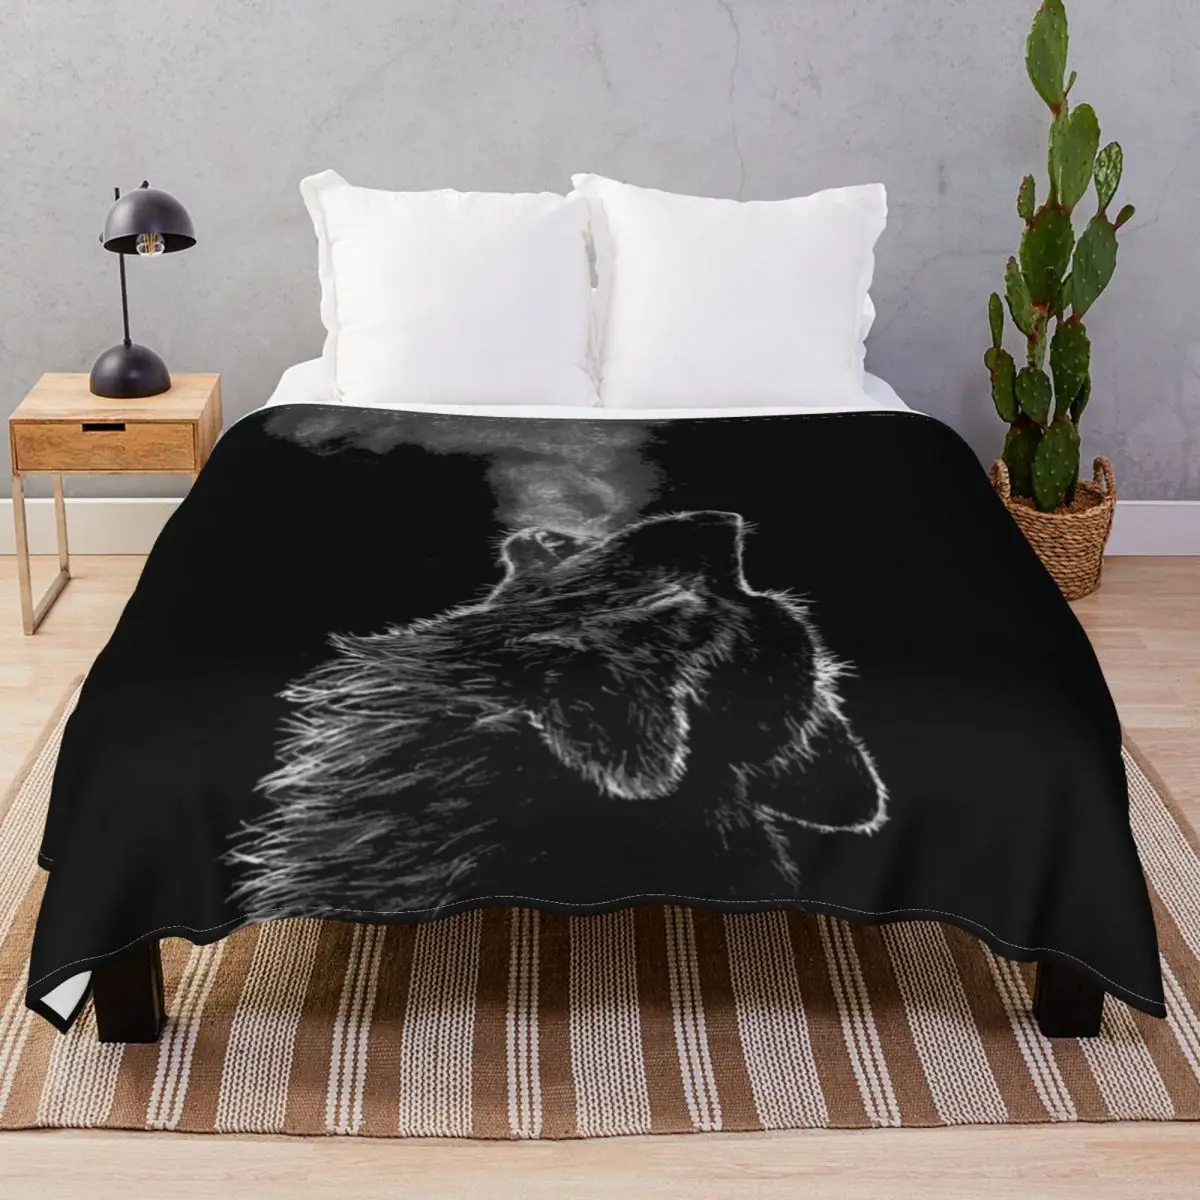 Wolf Blankets Coral Fleece Plush Decoration Ultra-Soft Throw Blanket for Bedding Home Couch Camp Office